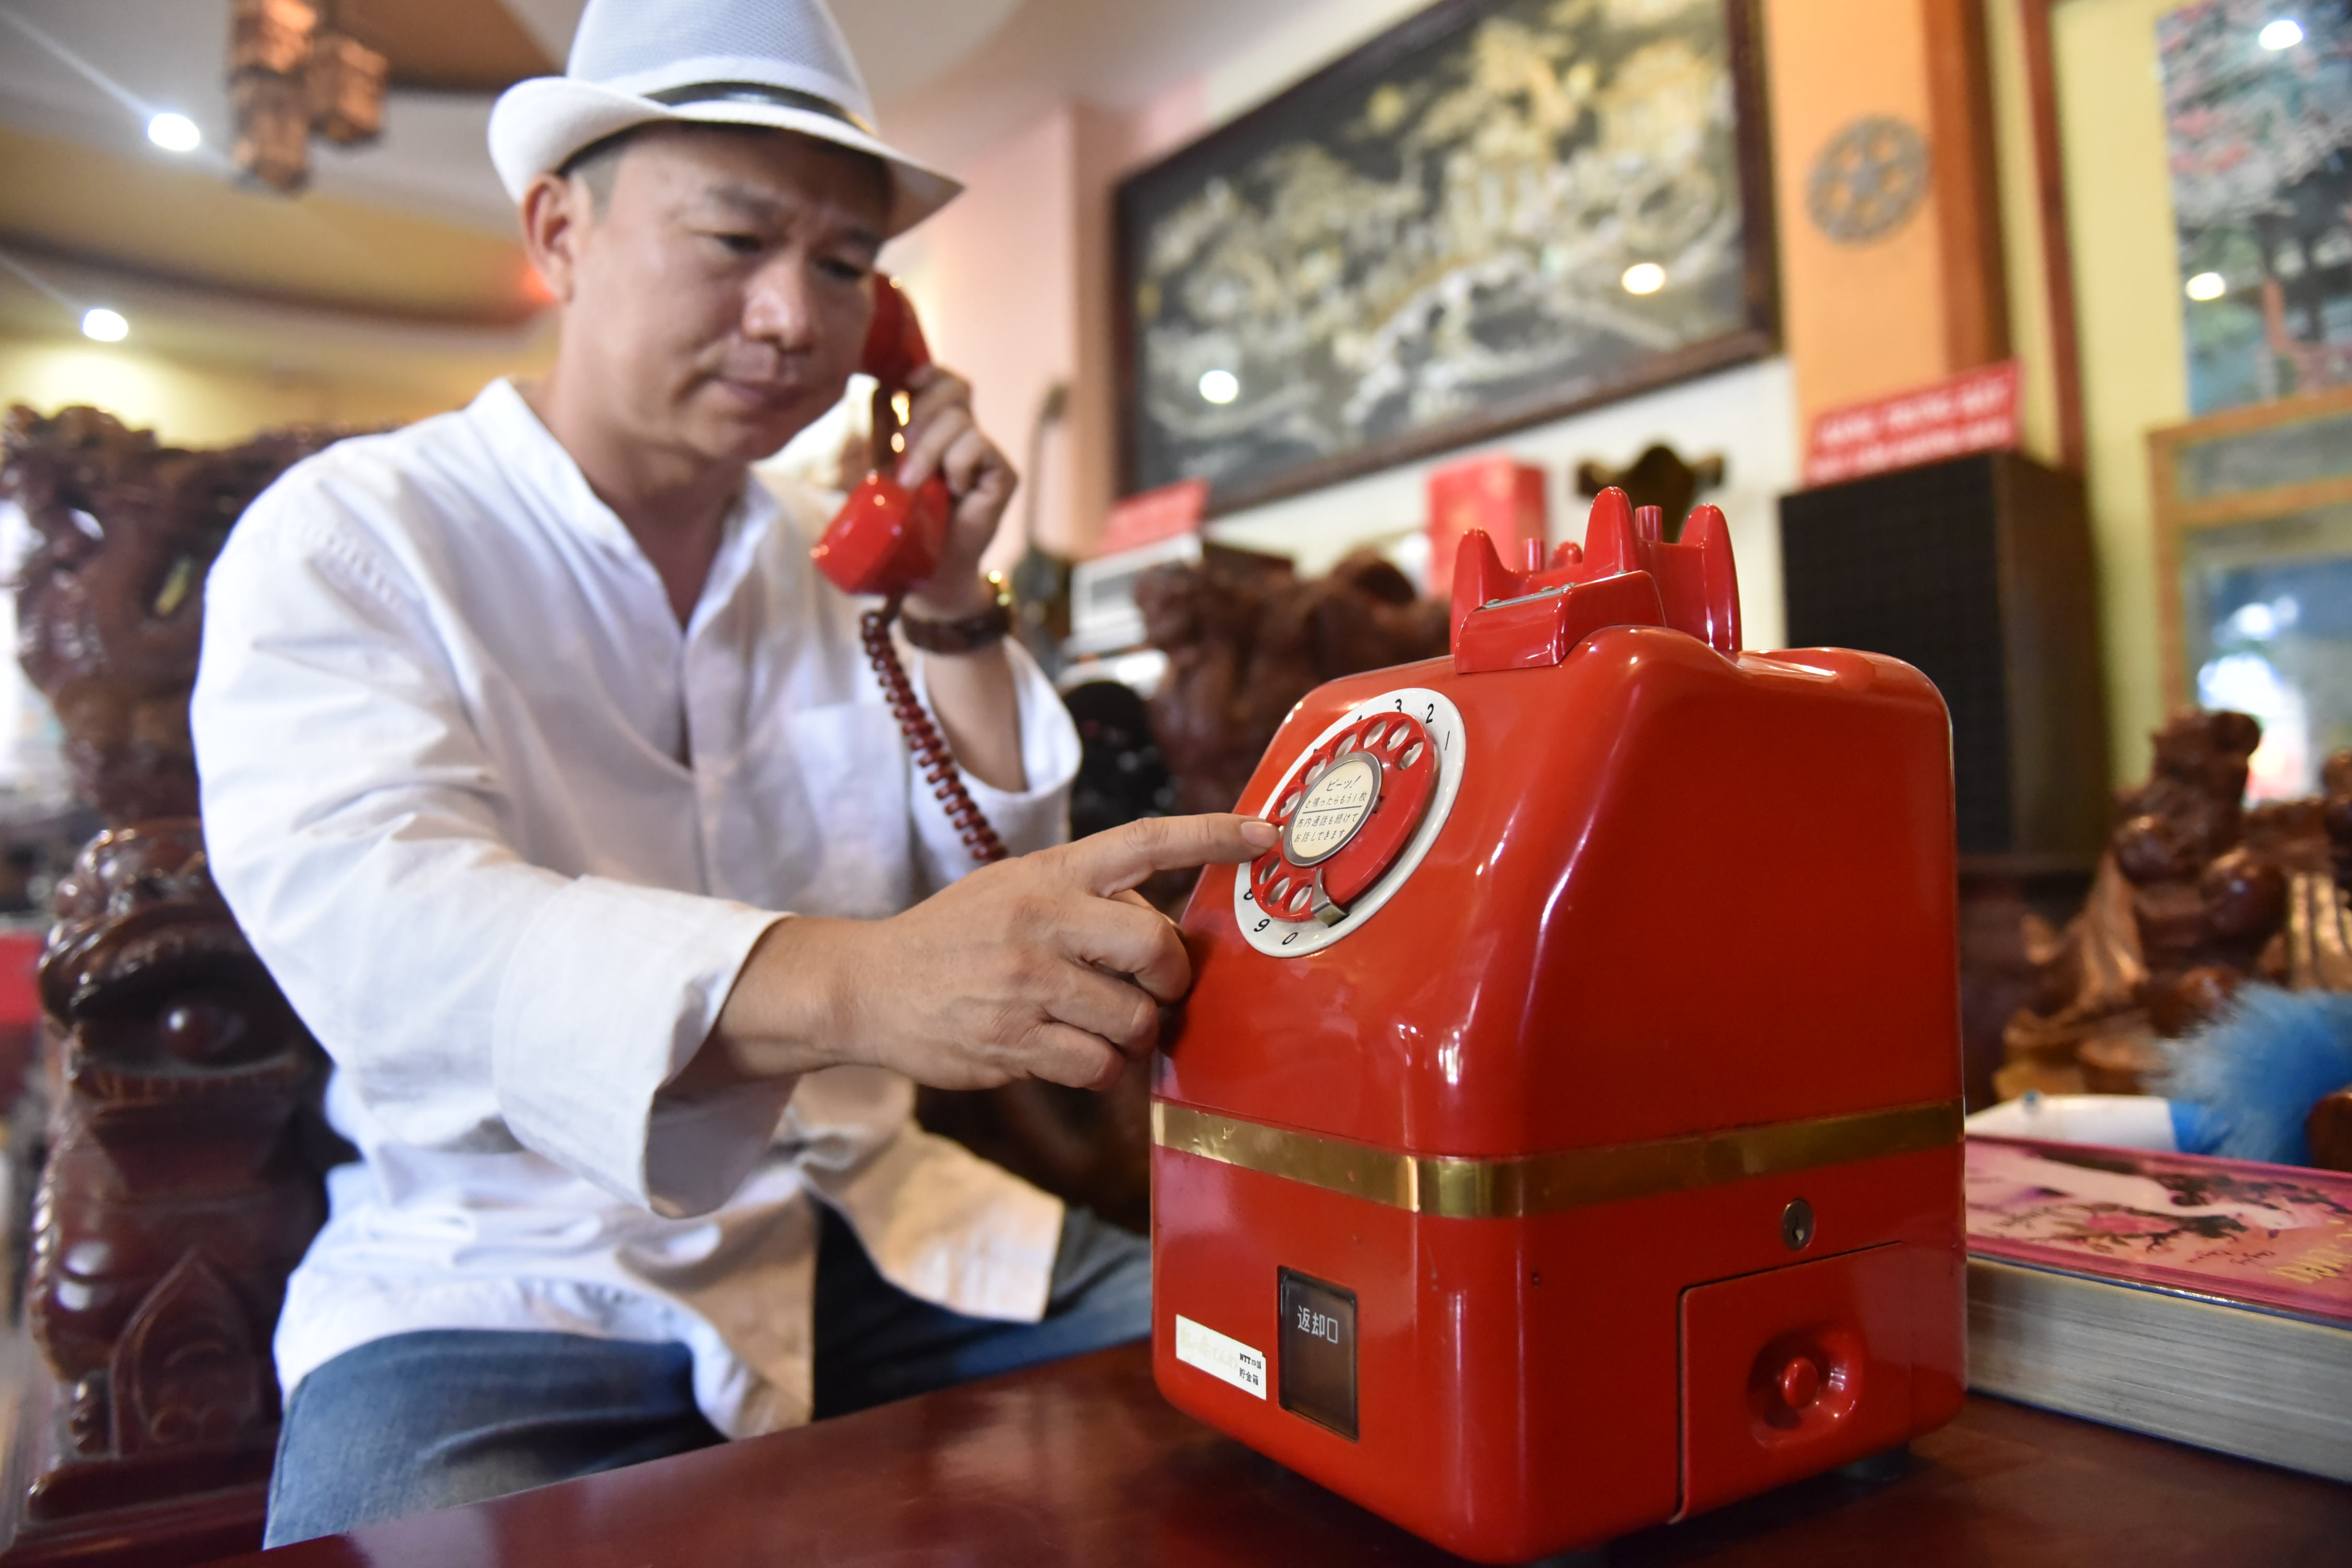 A Japanese rotary telephone weighing nearly 10kg in Tuan Akai’s collection. Photo: Ngoc Phuong / Tuoi Tre News